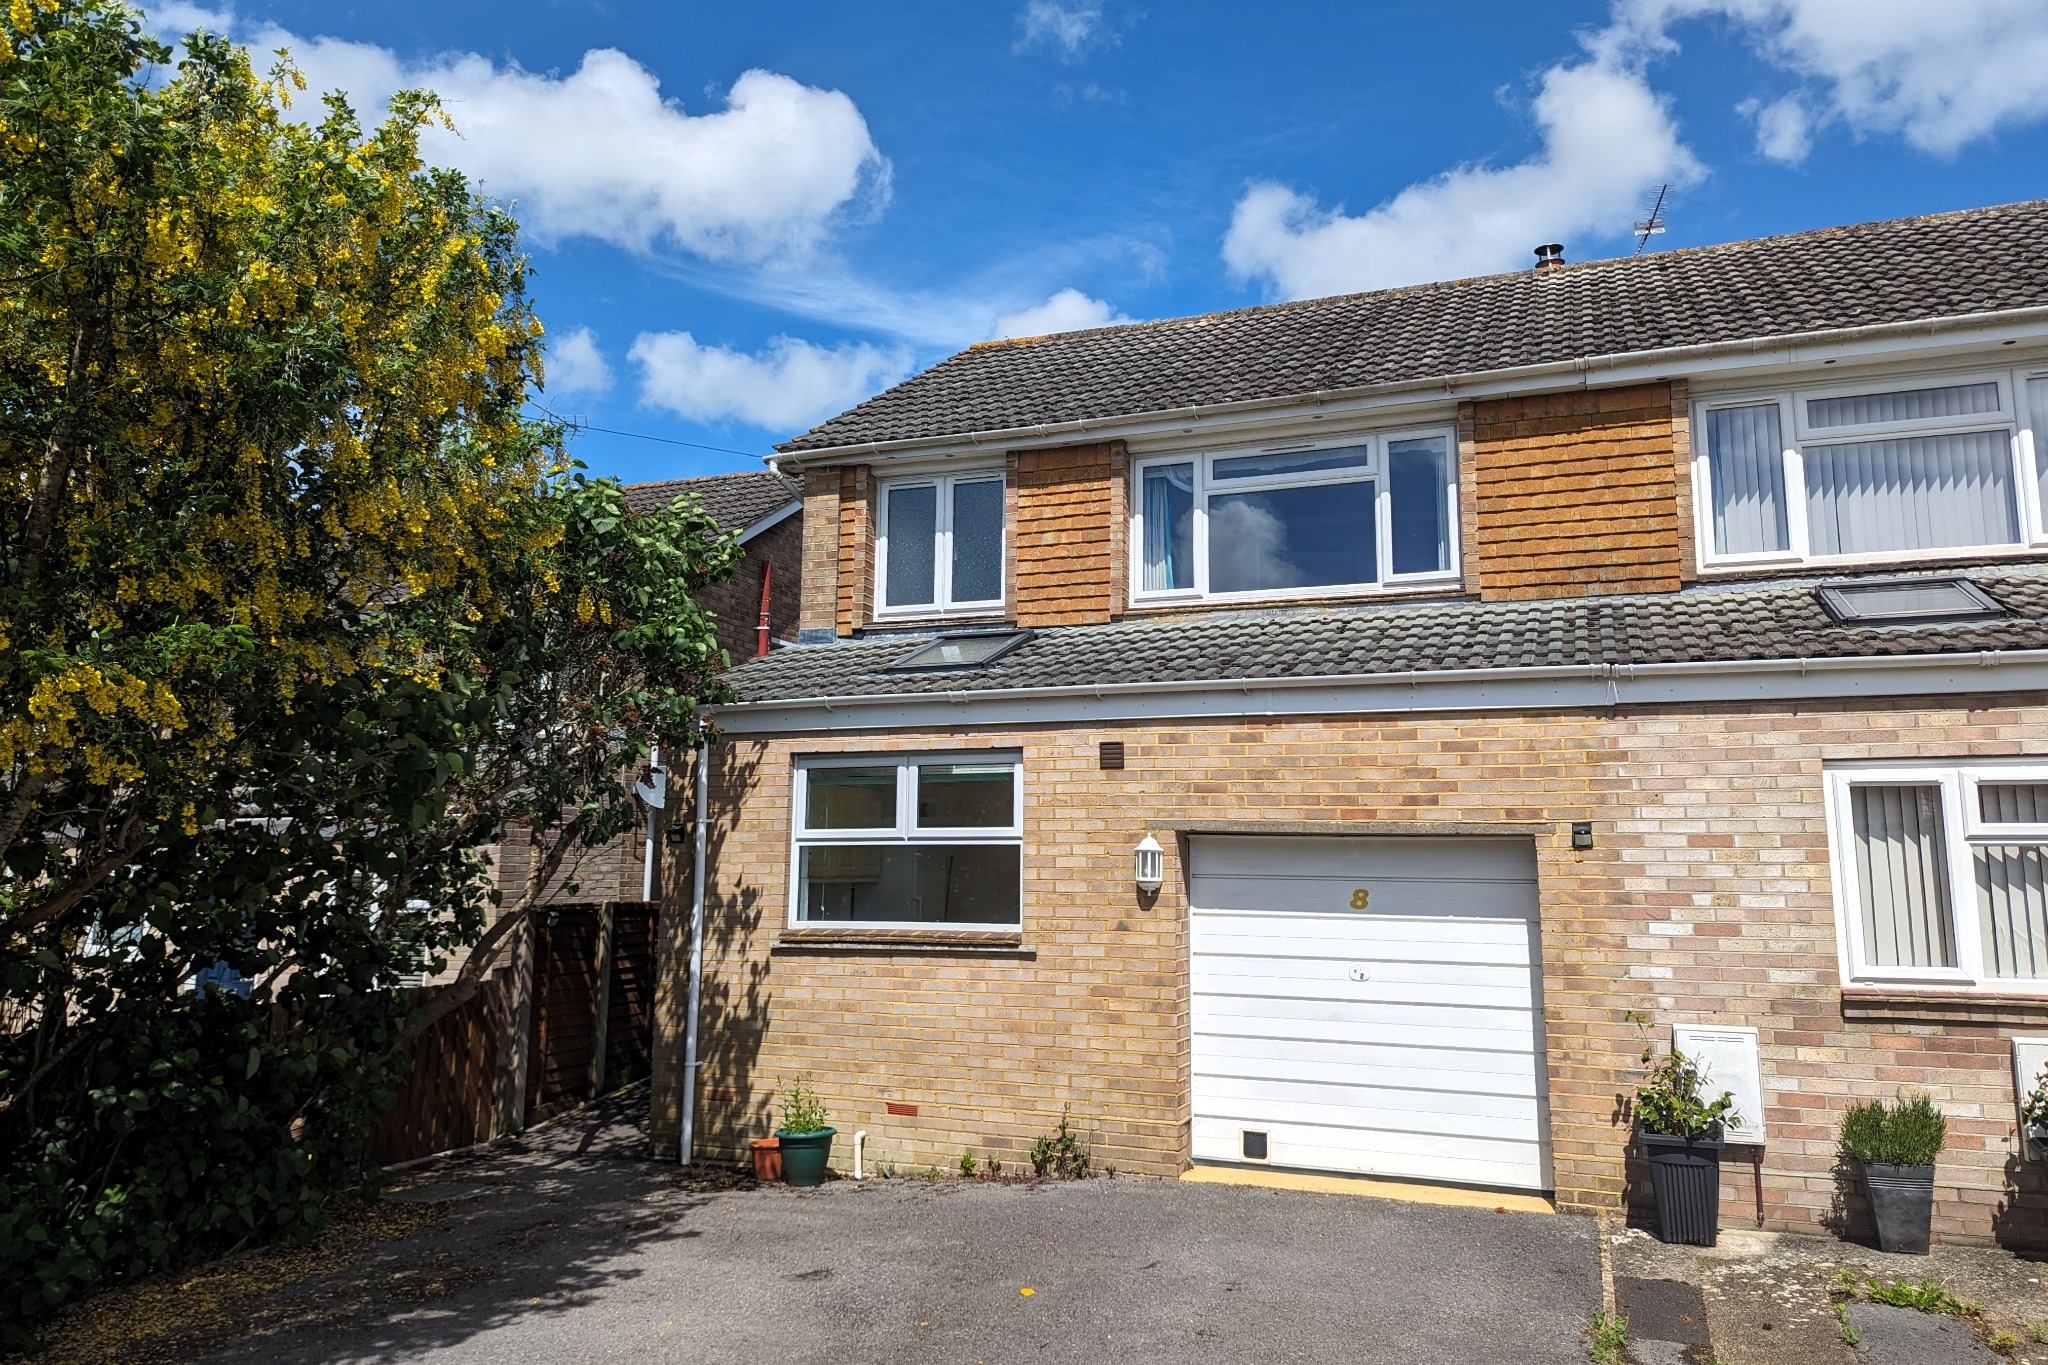 3 bed Semi-Detached House for rent in Romsey. From Pearsons Estate Agents - Romsey